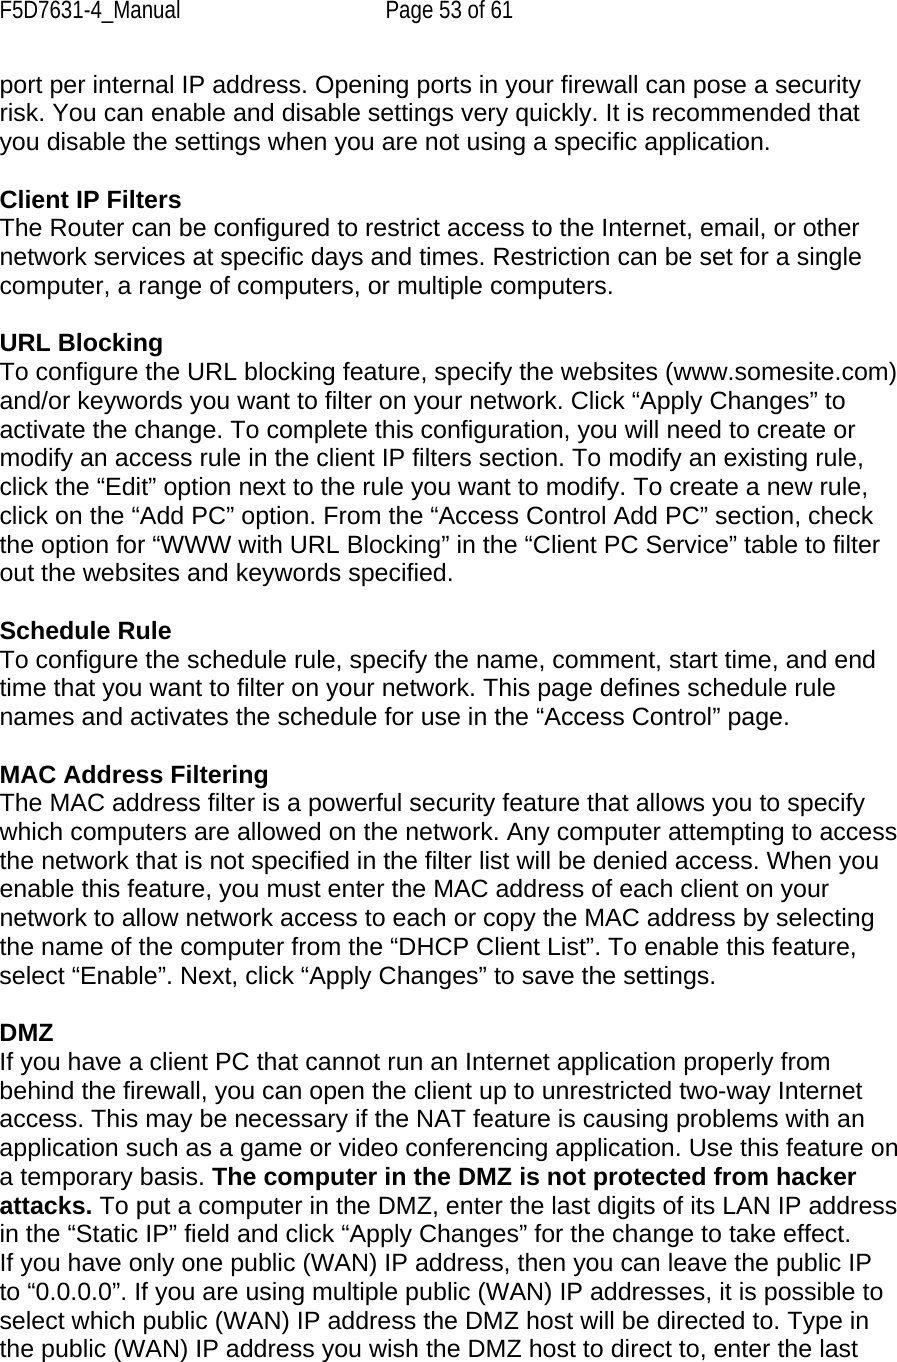 F5D7631-4_Manual  Page 53 of 61 port per internal IP address. Opening ports in your firewall can pose a security risk. You can enable and disable settings very quickly. It is recommended that you disable the settings when you are not using a specific application.  Client IP Filters The Router can be configured to restrict access to the Internet, email, or other network services at specific days and times. Restriction can be set for a single computer, a range of computers, or multiple computers.  URL Blocking To configure the URL blocking feature, specify the websites (www.somesite.com) and/or keywords you want to filter on your network. Click “Apply Changes” to activate the change. To complete this configuration, you will need to create or modify an access rule in the client IP filters section. To modify an existing rule, click the “Edit” option next to the rule you want to modify. To create a new rule, click on the “Add PC” option. From the “Access Control Add PC” section, check the option for “WWW with URL Blocking” in the “Client PC Service” table to filter out the websites and keywords specified.  Schedule Rule To configure the schedule rule, specify the name, comment, start time, and end time that you want to filter on your network. This page defines schedule rule names and activates the schedule for use in the “Access Control” page.  MAC Address Filtering The MAC address filter is a powerful security feature that allows you to specify which computers are allowed on the network. Any computer attempting to access the network that is not specified in the filter list will be denied access. When you enable this feature, you must enter the MAC address of each client on your network to allow network access to each or copy the MAC address by selecting the name of the computer from the “DHCP Client List”. To enable this feature, select “Enable”. Next, click “Apply Changes” to save the settings.  DMZ If you have a client PC that cannot run an Internet application properly from behind the firewall, you can open the client up to unrestricted two-way Internet access. This may be necessary if the NAT feature is causing problems with an application such as a game or video conferencing application. Use this feature on a temporary basis. The computer in the DMZ is not protected from hacker attacks. To put a computer in the DMZ, enter the last digits of its LAN IP address in the “Static IP” field and click “Apply Changes” for the change to take effect. If you have only one public (WAN) IP address, then you can leave the public IP to “0.0.0.0”. If you are using multiple public (WAN) IP addresses, it is possible to select which public (WAN) IP address the DMZ host will be directed to. Type in the public (WAN) IP address you wish the DMZ host to direct to, enter the last 